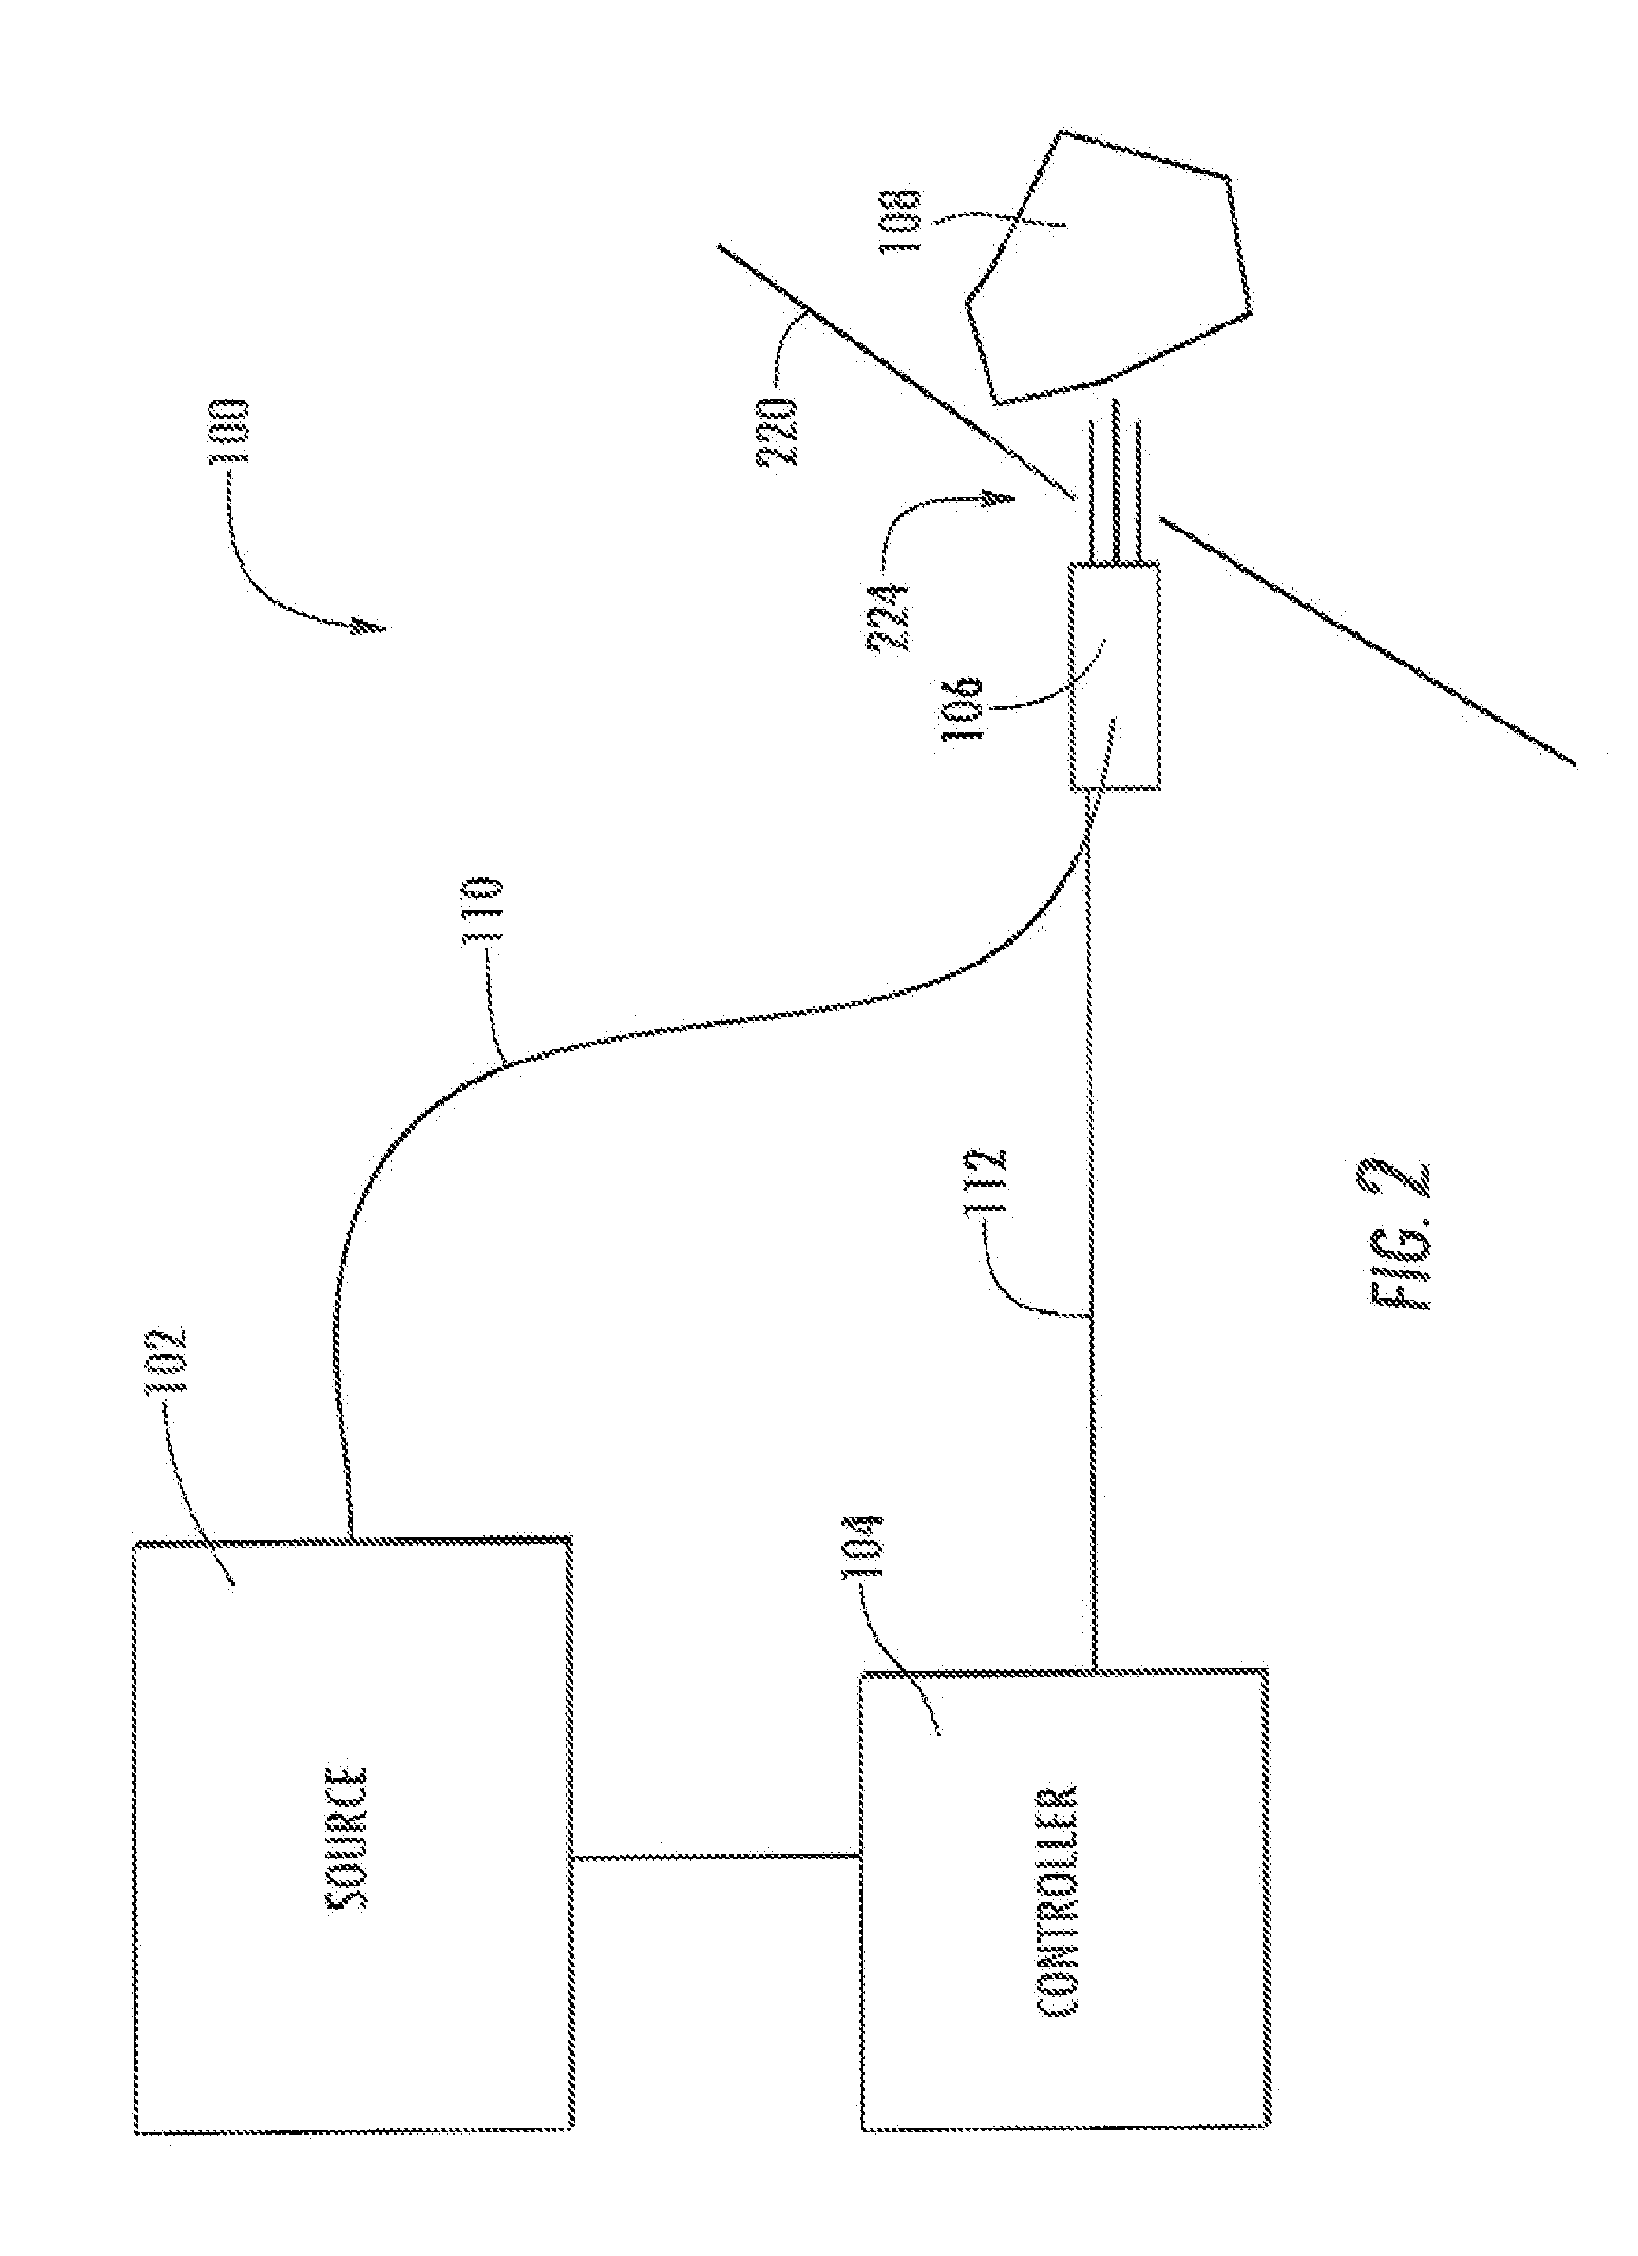 Pulsed therapeutic light system and method